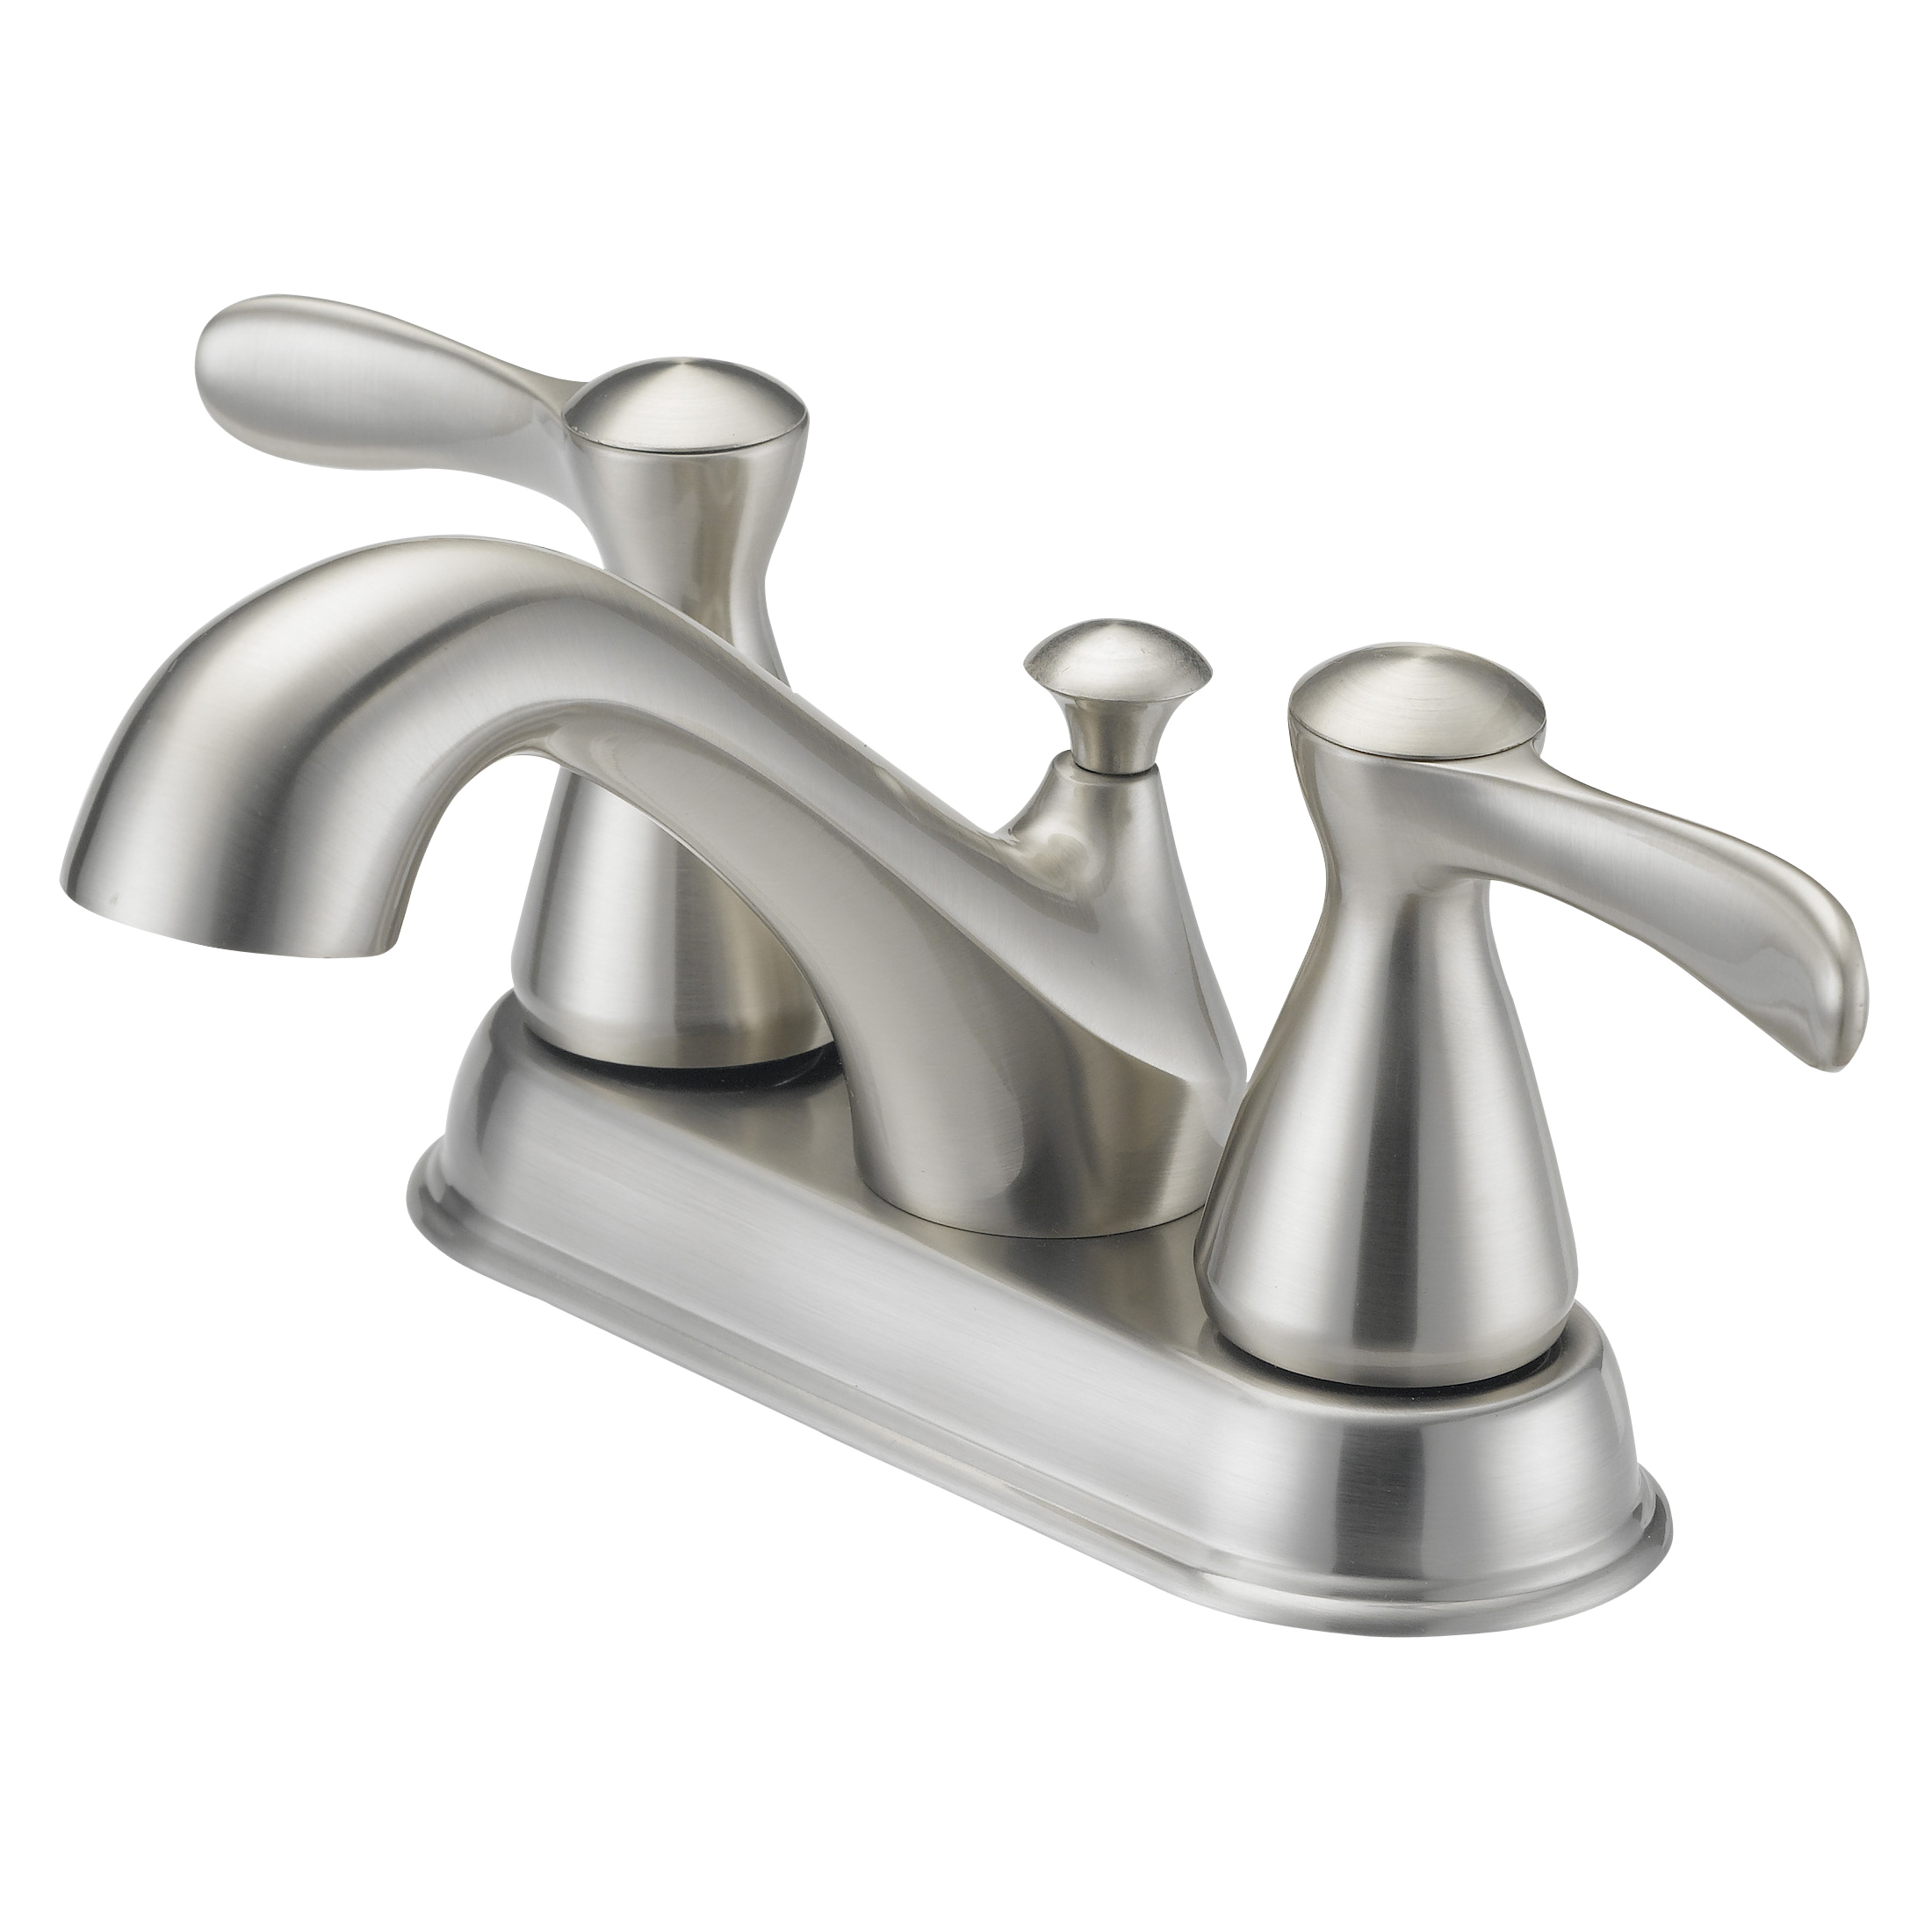 F51B0010NP Lavatory Faucet, 1.2 gpm, 2-Faucet Handle, 3-Faucet Hole, Metal/Plastic, Brushed Nickel